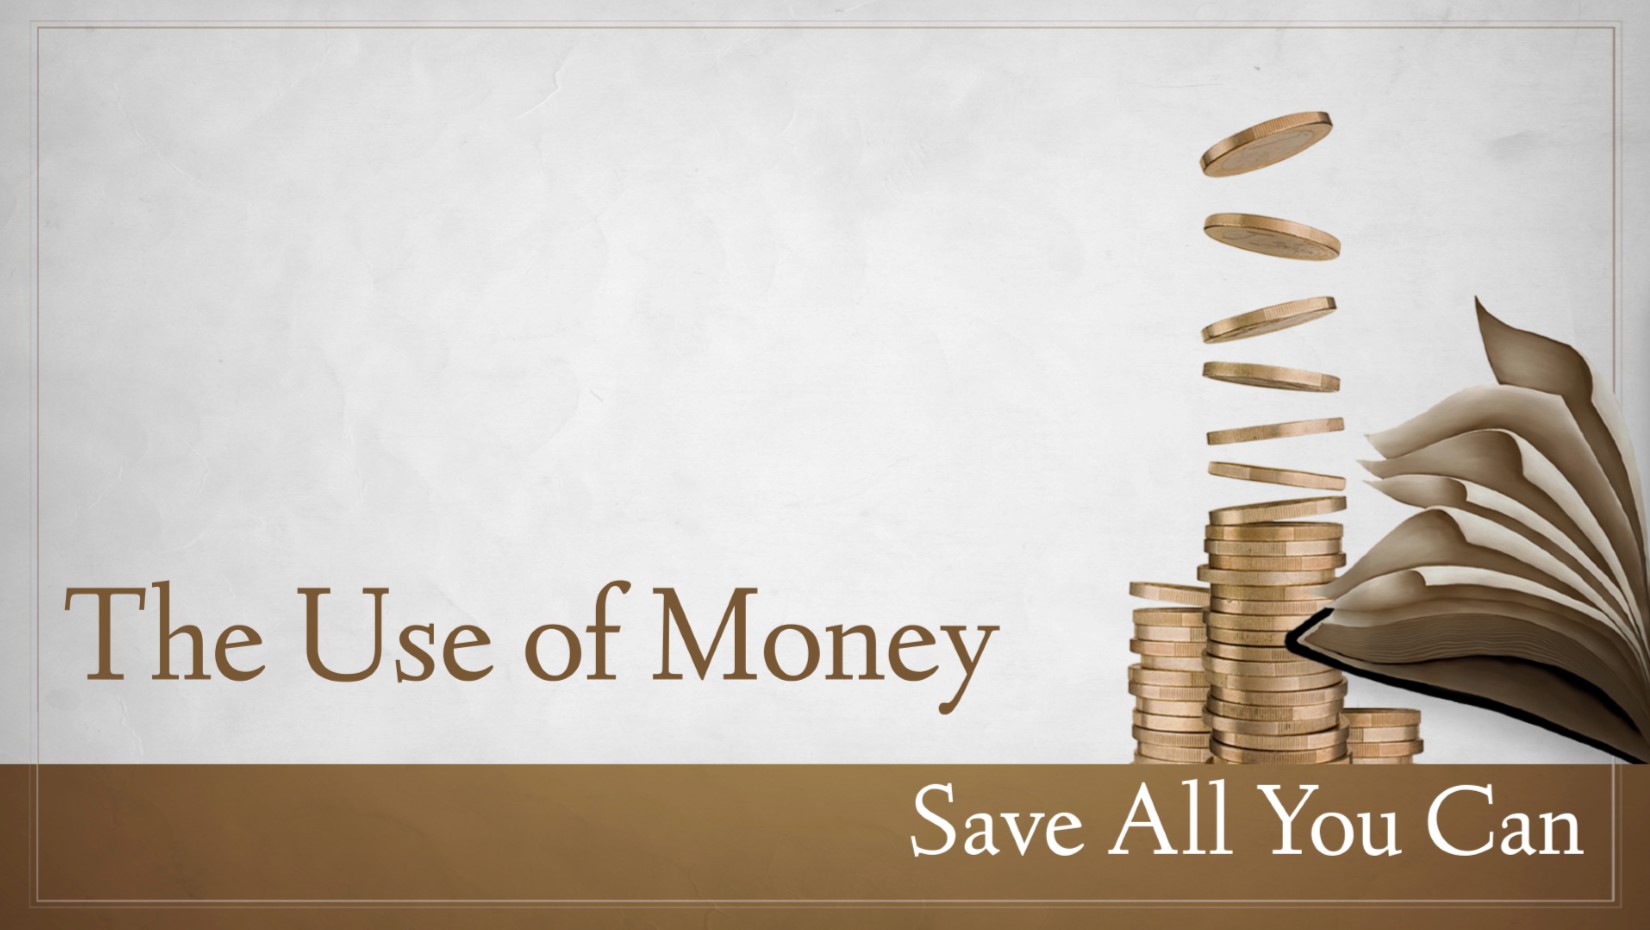 11.08.2020 The Use of Money: Save All You Can Philippians 4:10 – 20